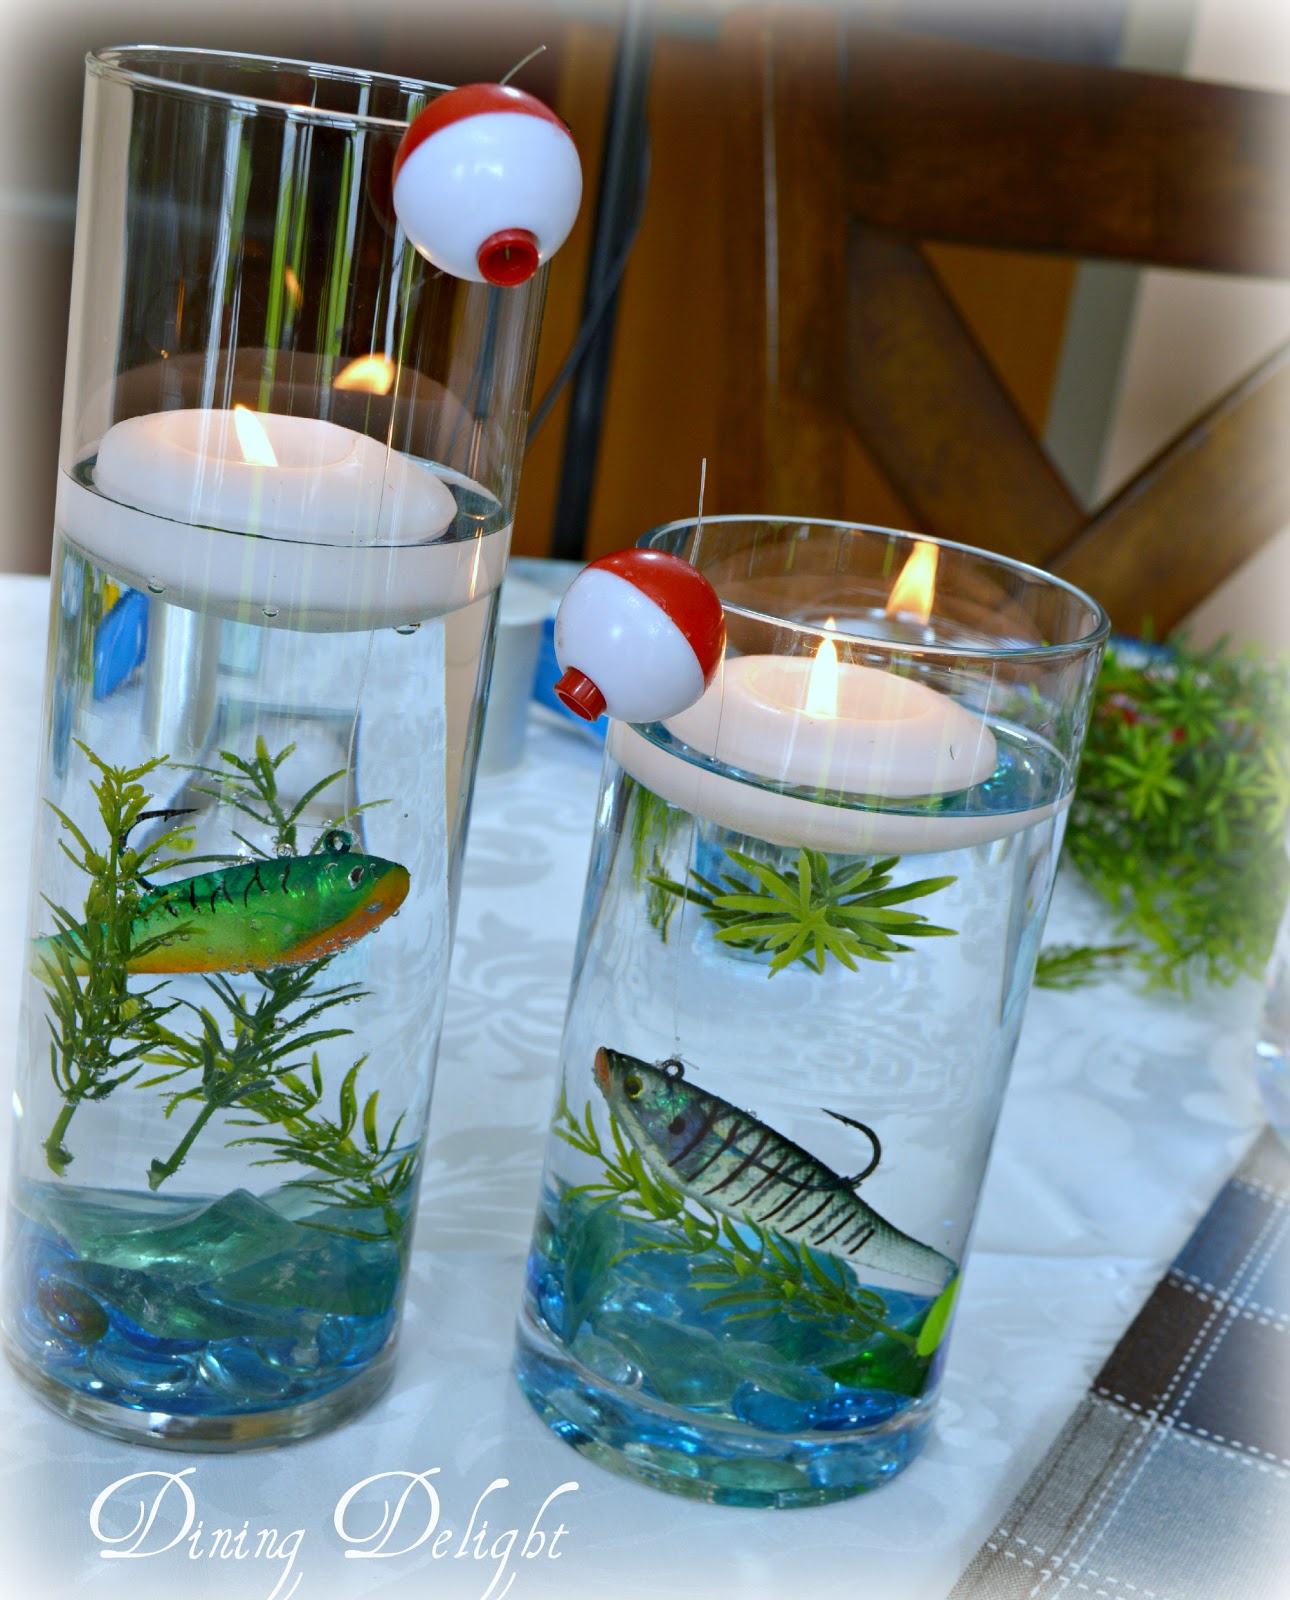 Dining Delight: Fishing Centerpiece in Cylinder Vase